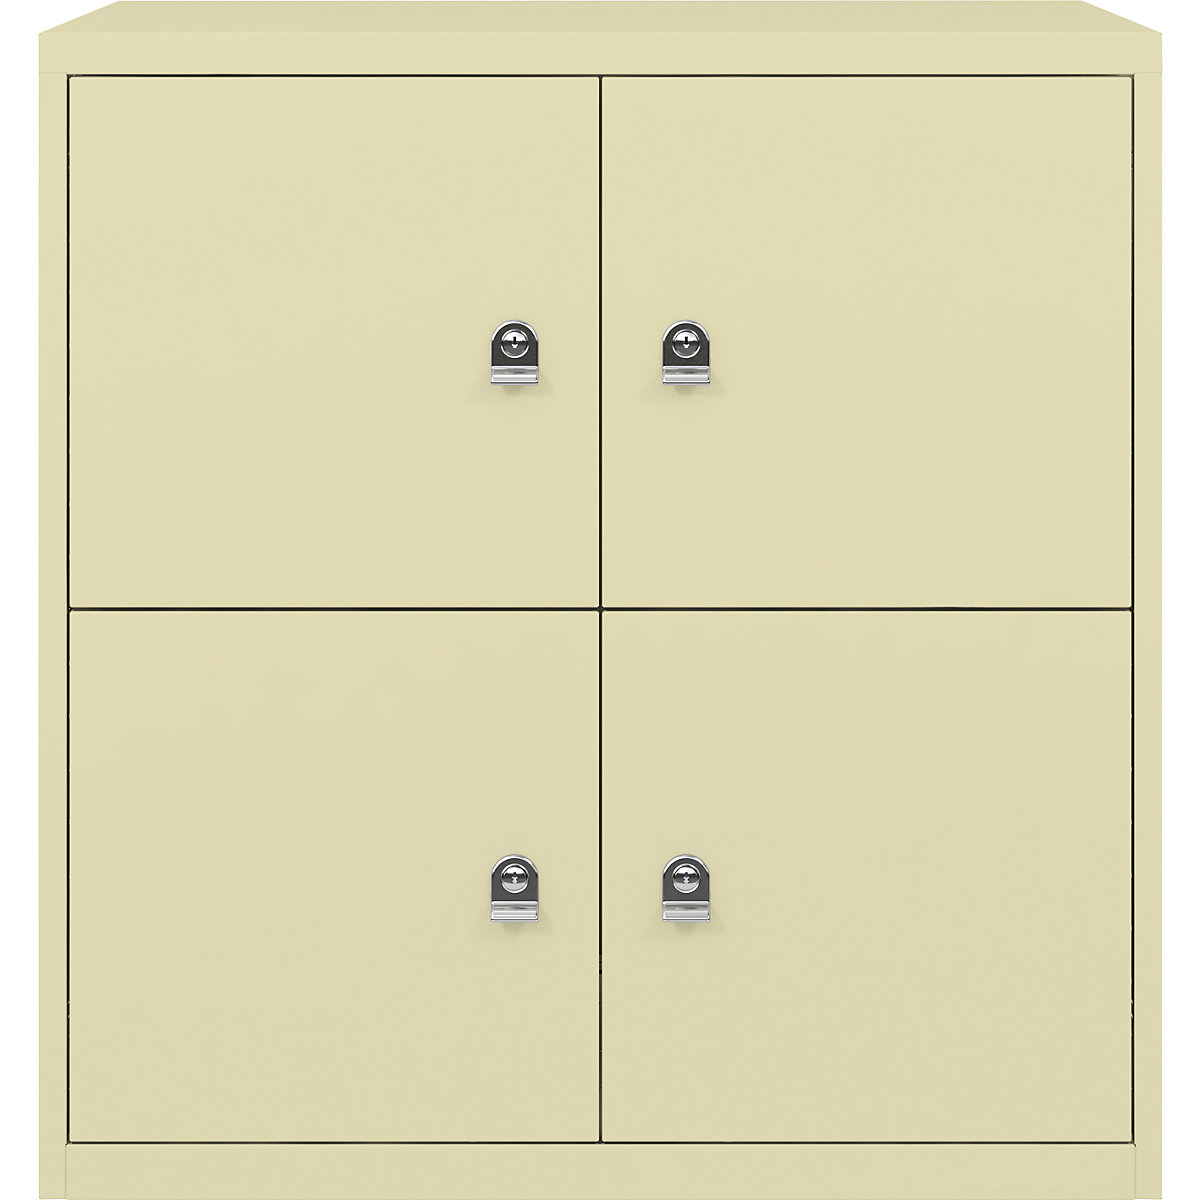 BISLEY – LateralFile™ lodge, with 4 lockable compartments, height 375 mm each, cream